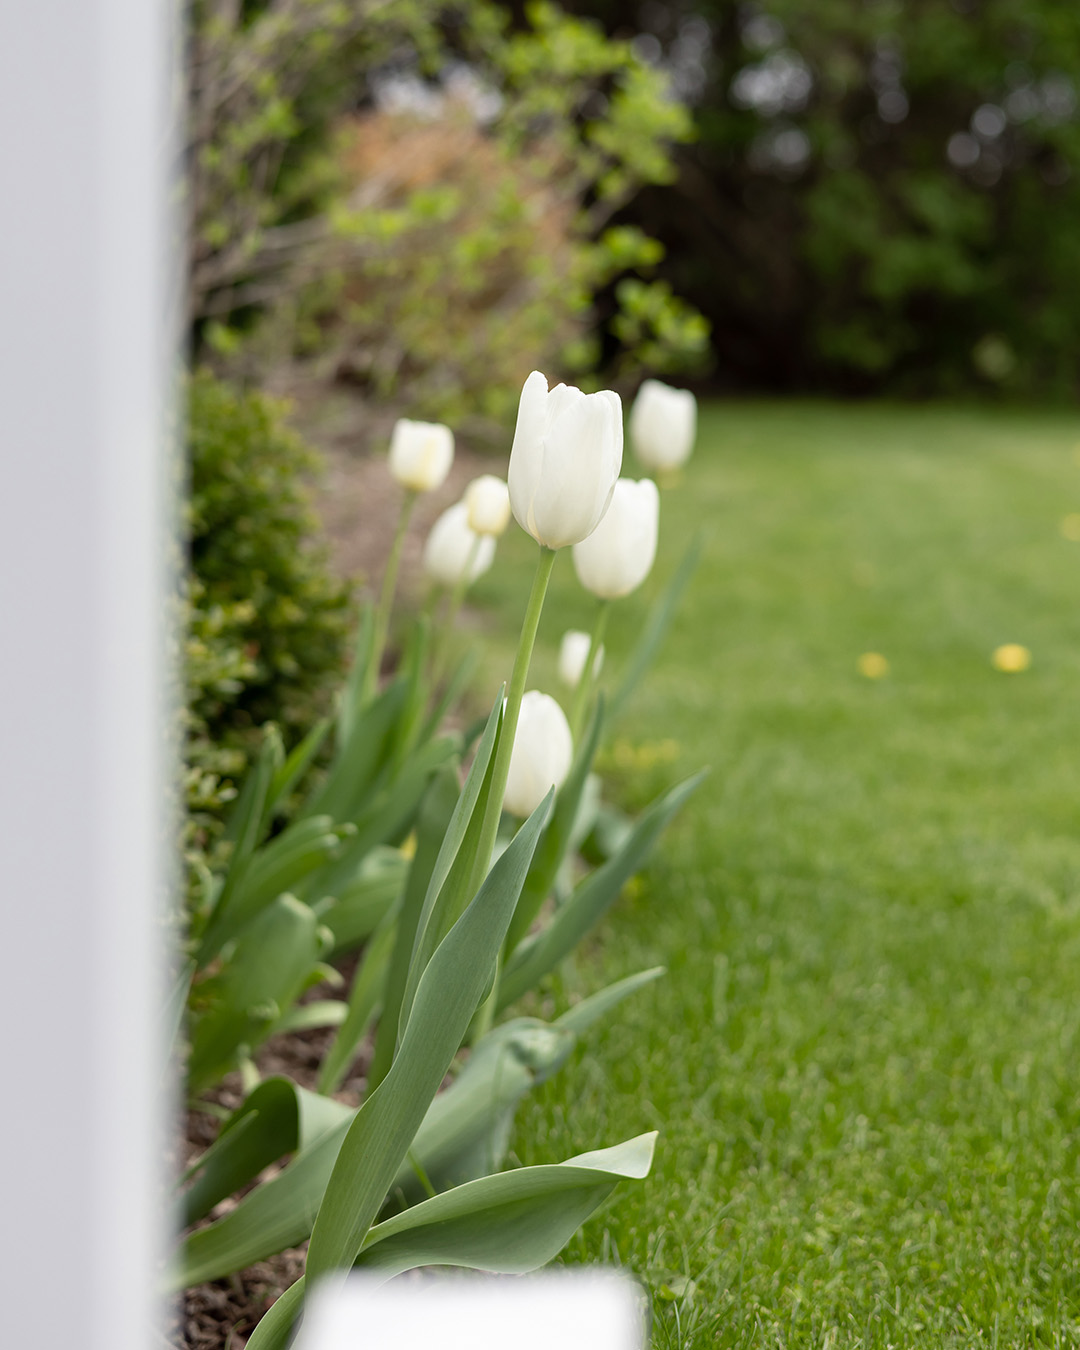 Every garden deserves a little early spring cheer and adding spring bulbs is an easy way to do it. Here's how to grow tulips!